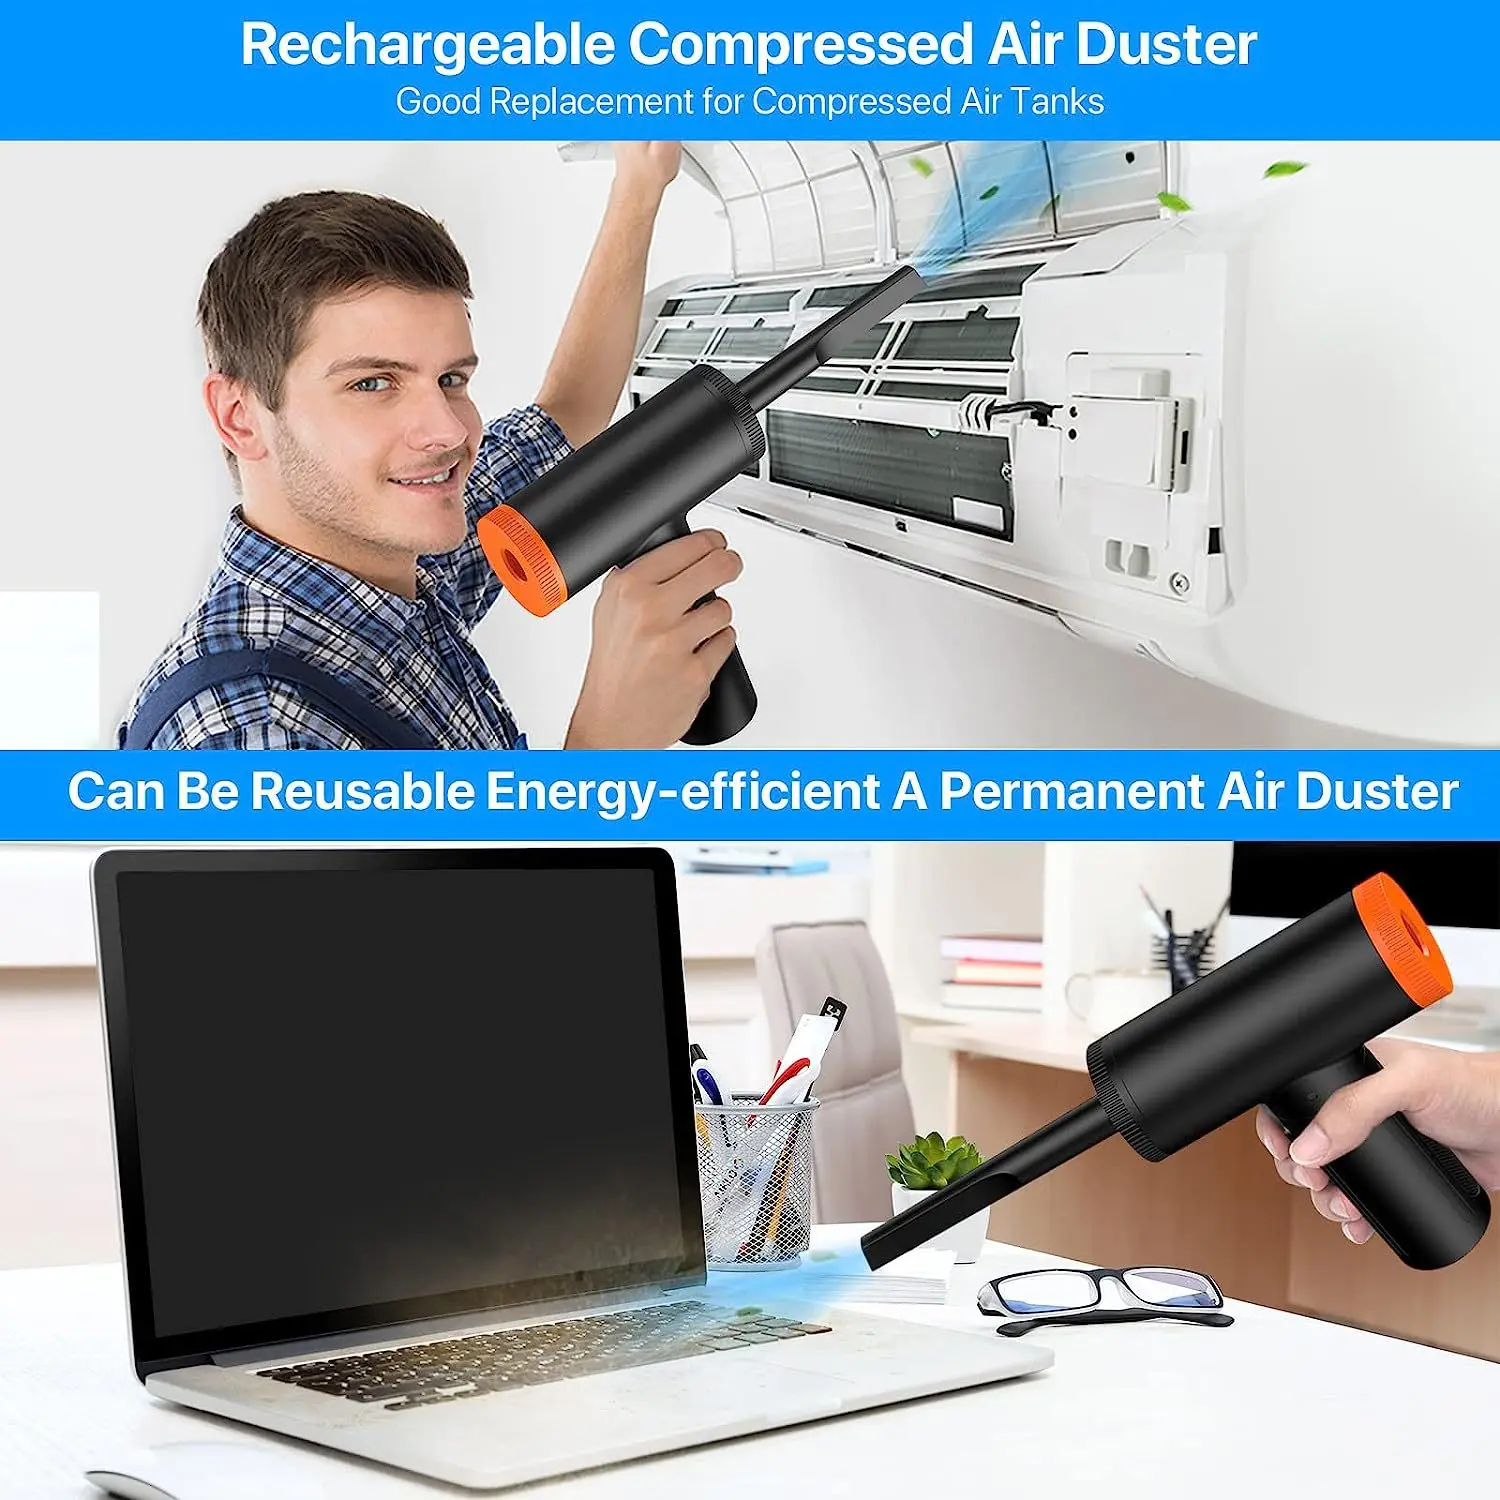 Portable Brushless Compressed Air Duster 2 in 1 Air Blower & Vacuum Cleaner Cordless Blower for Keyboard Computer desk vacuum